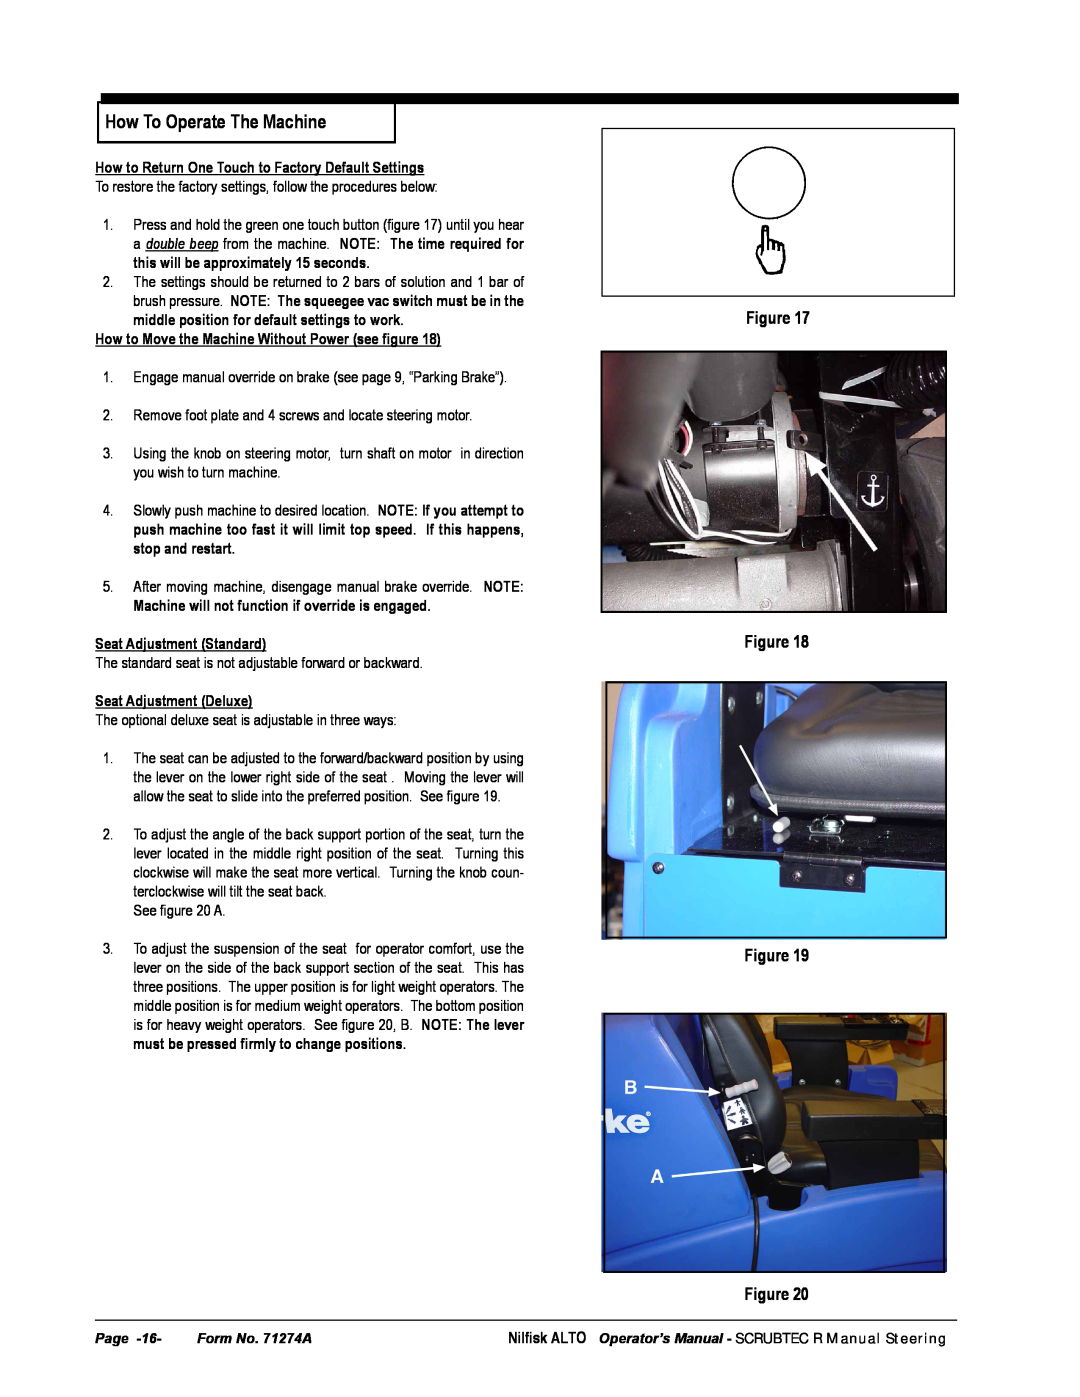 Nilfisk-ALTO 586 How To Operate The Machine, How to Move the Machine Without Power see ﬁgure, Seat Adjustment Standard 